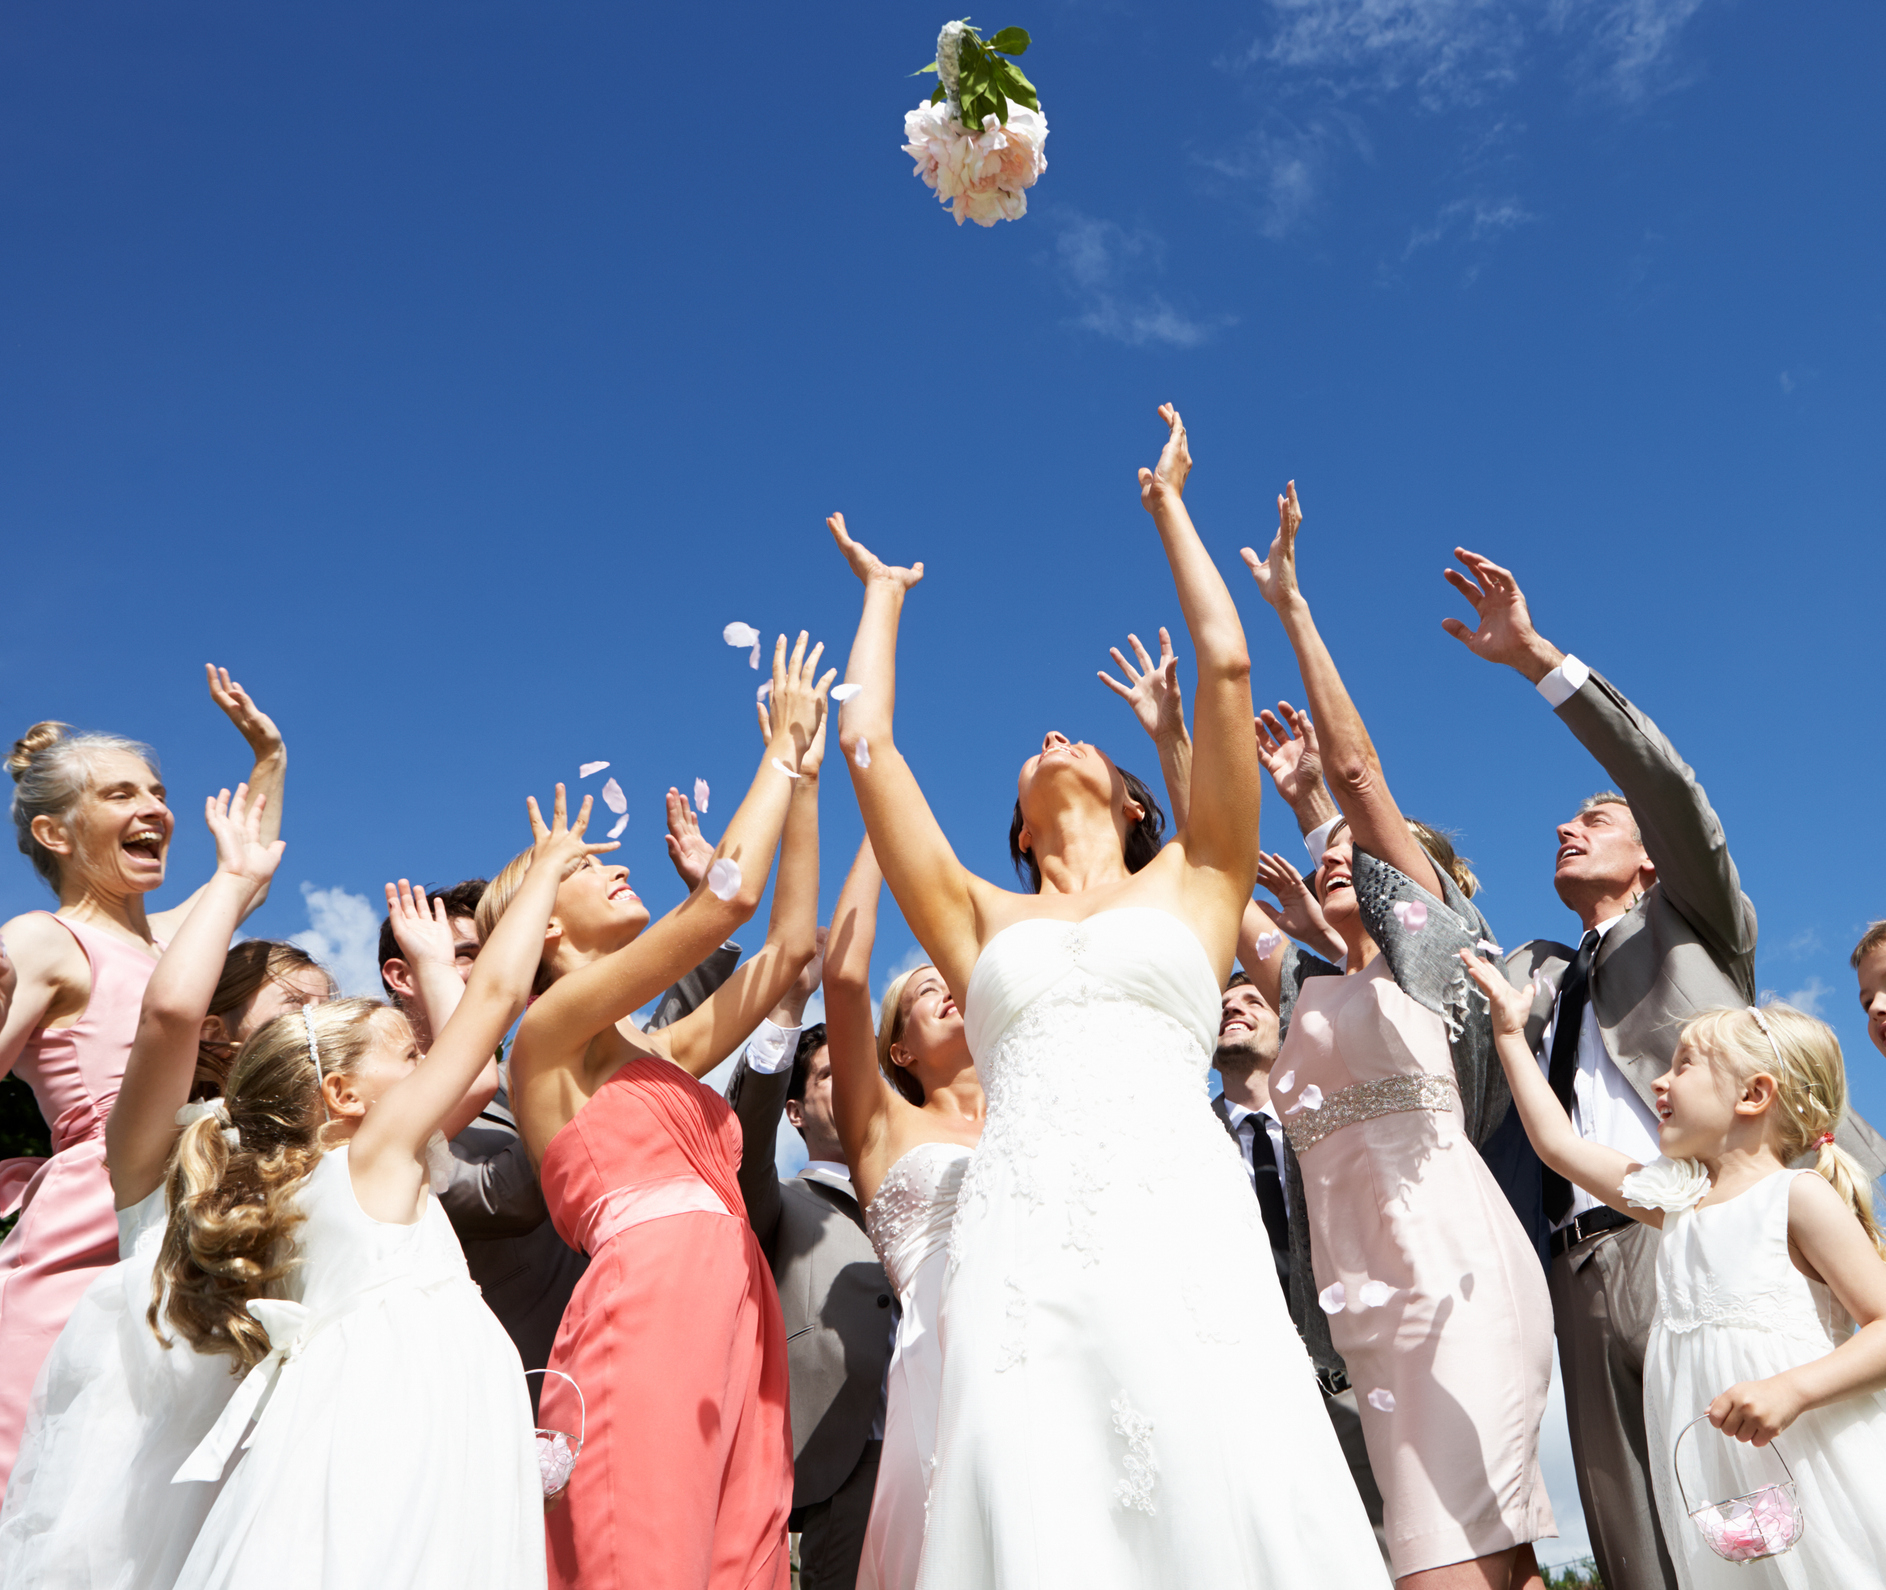 Bride and guests reaching for a thrown bouquet under a clear sky